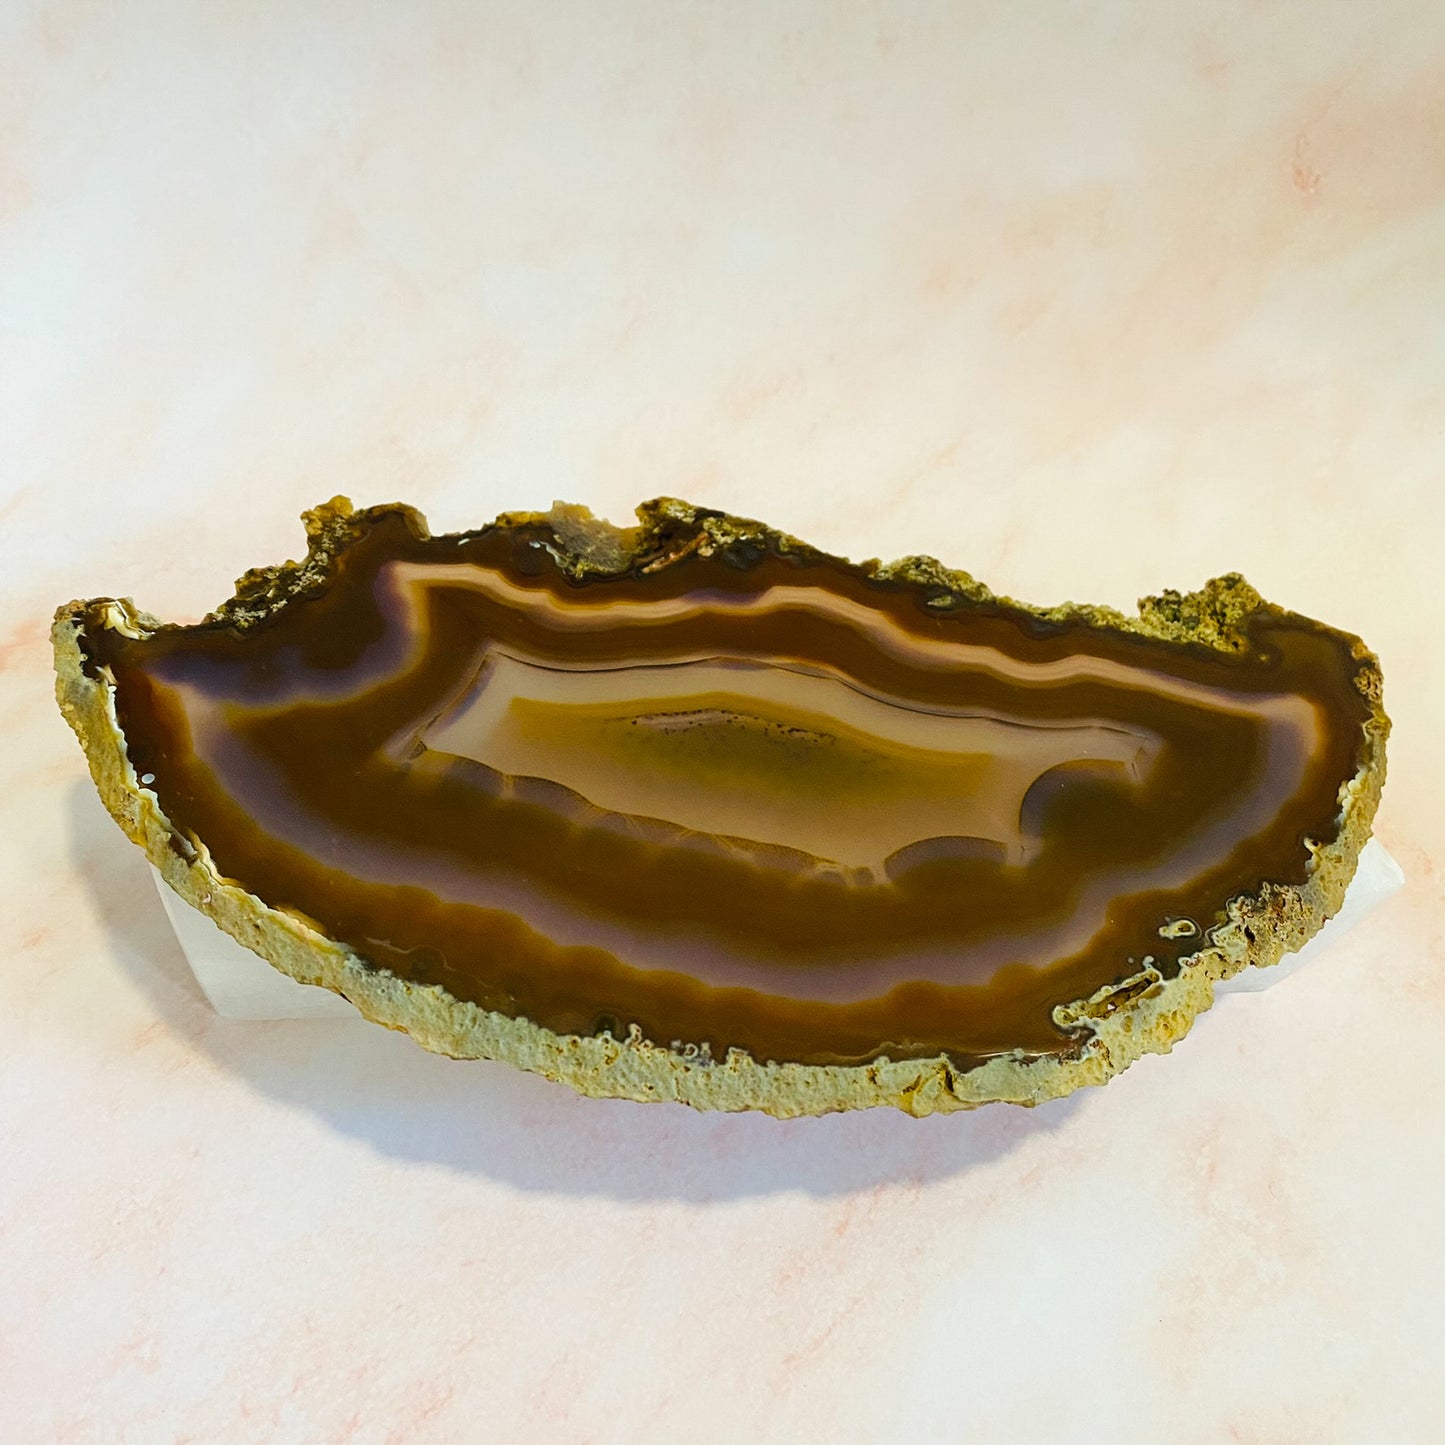 Agate Crystal, Raw Agate, Healing Crystal, Unique Agate Specimen, Grounding Crystal, 10" x 4.5" Natural Agate, Good Luck Crystal